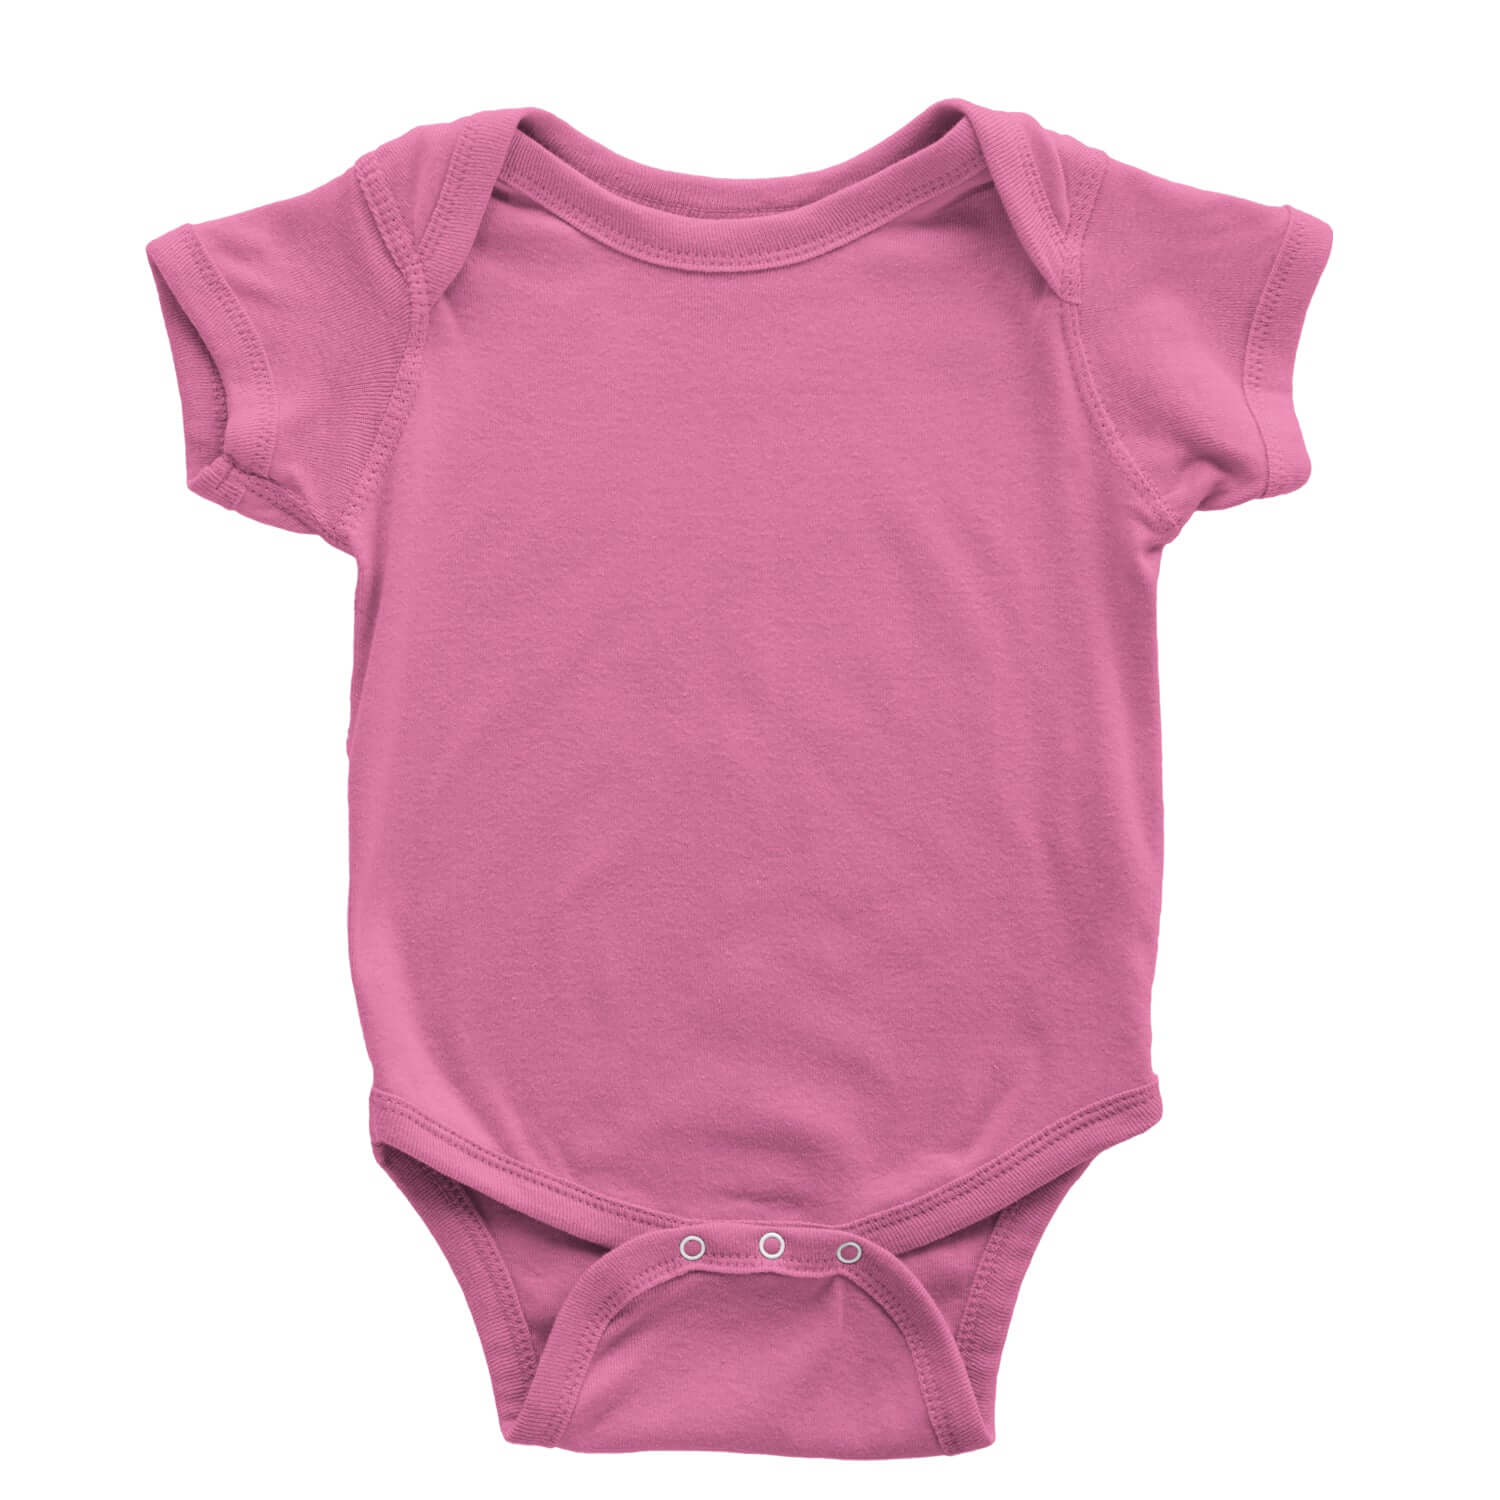 Basics - Plain Blank Infant One-Piece Romper Bodysuit and Toddler T-shirt blank, clothing, plain, tshirts by Expression Tees